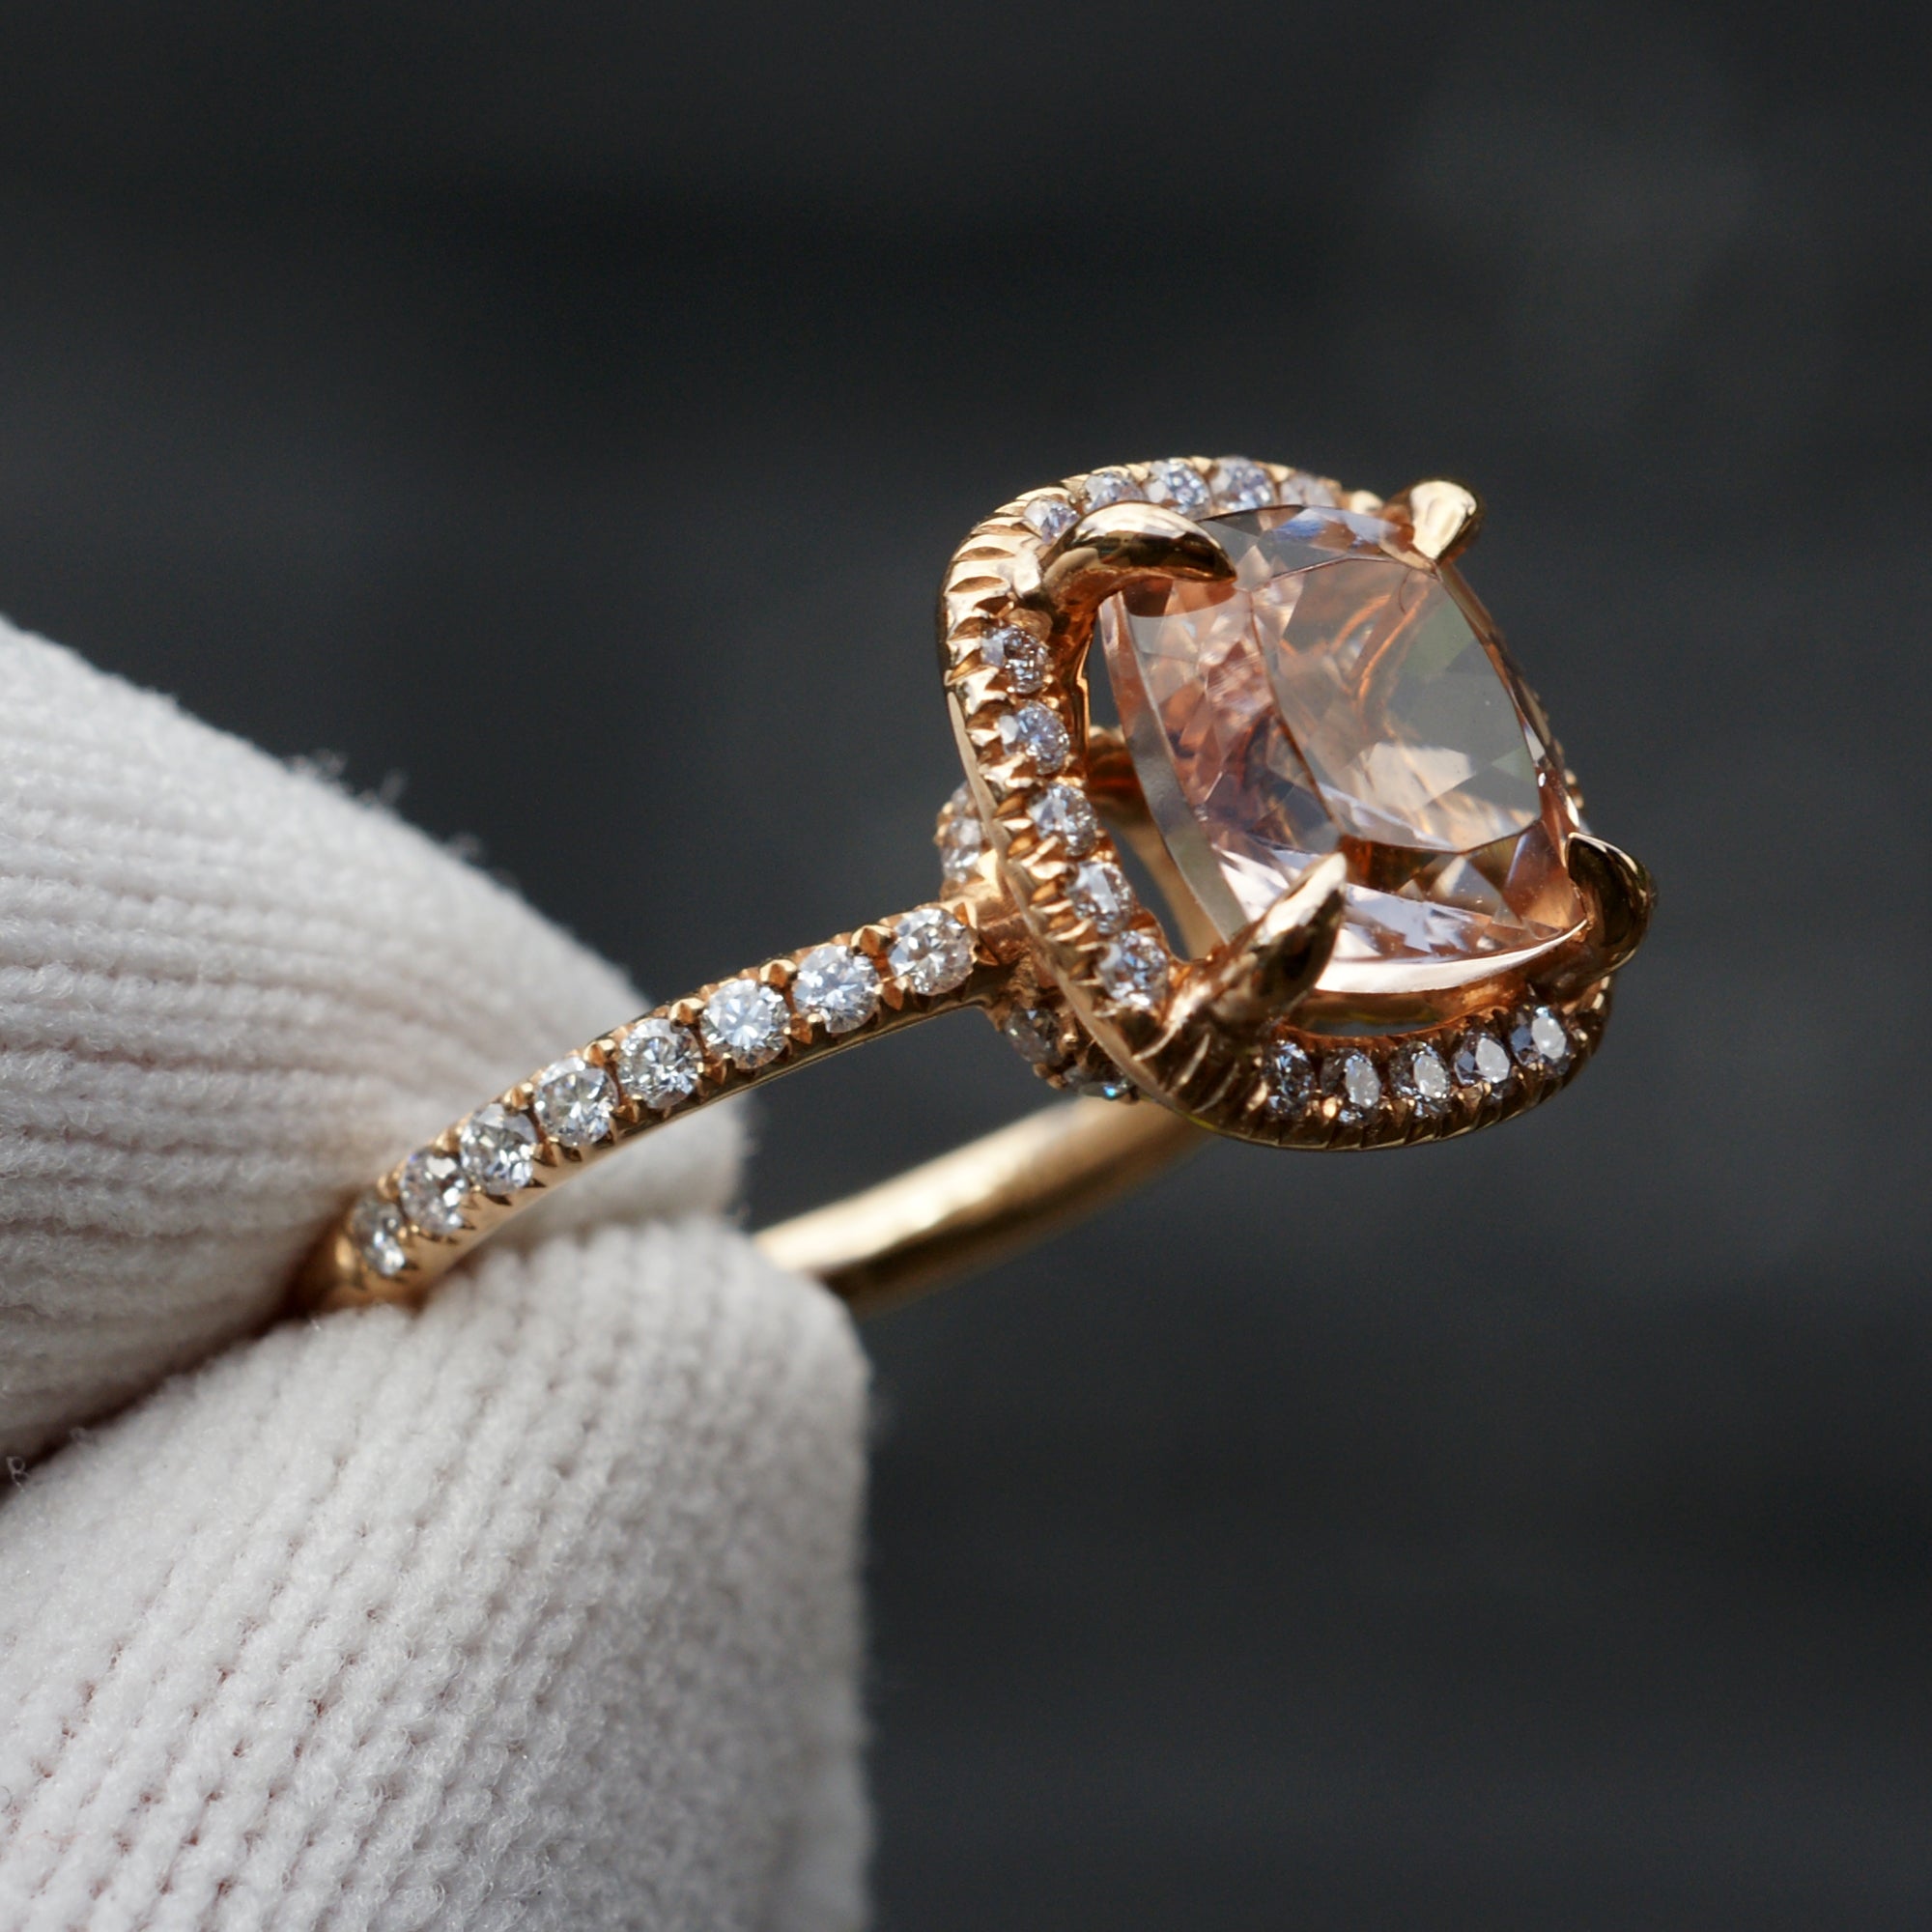 Square Cushion Morganite Ring 14k Rose Gold 8x8mm - The Drenched